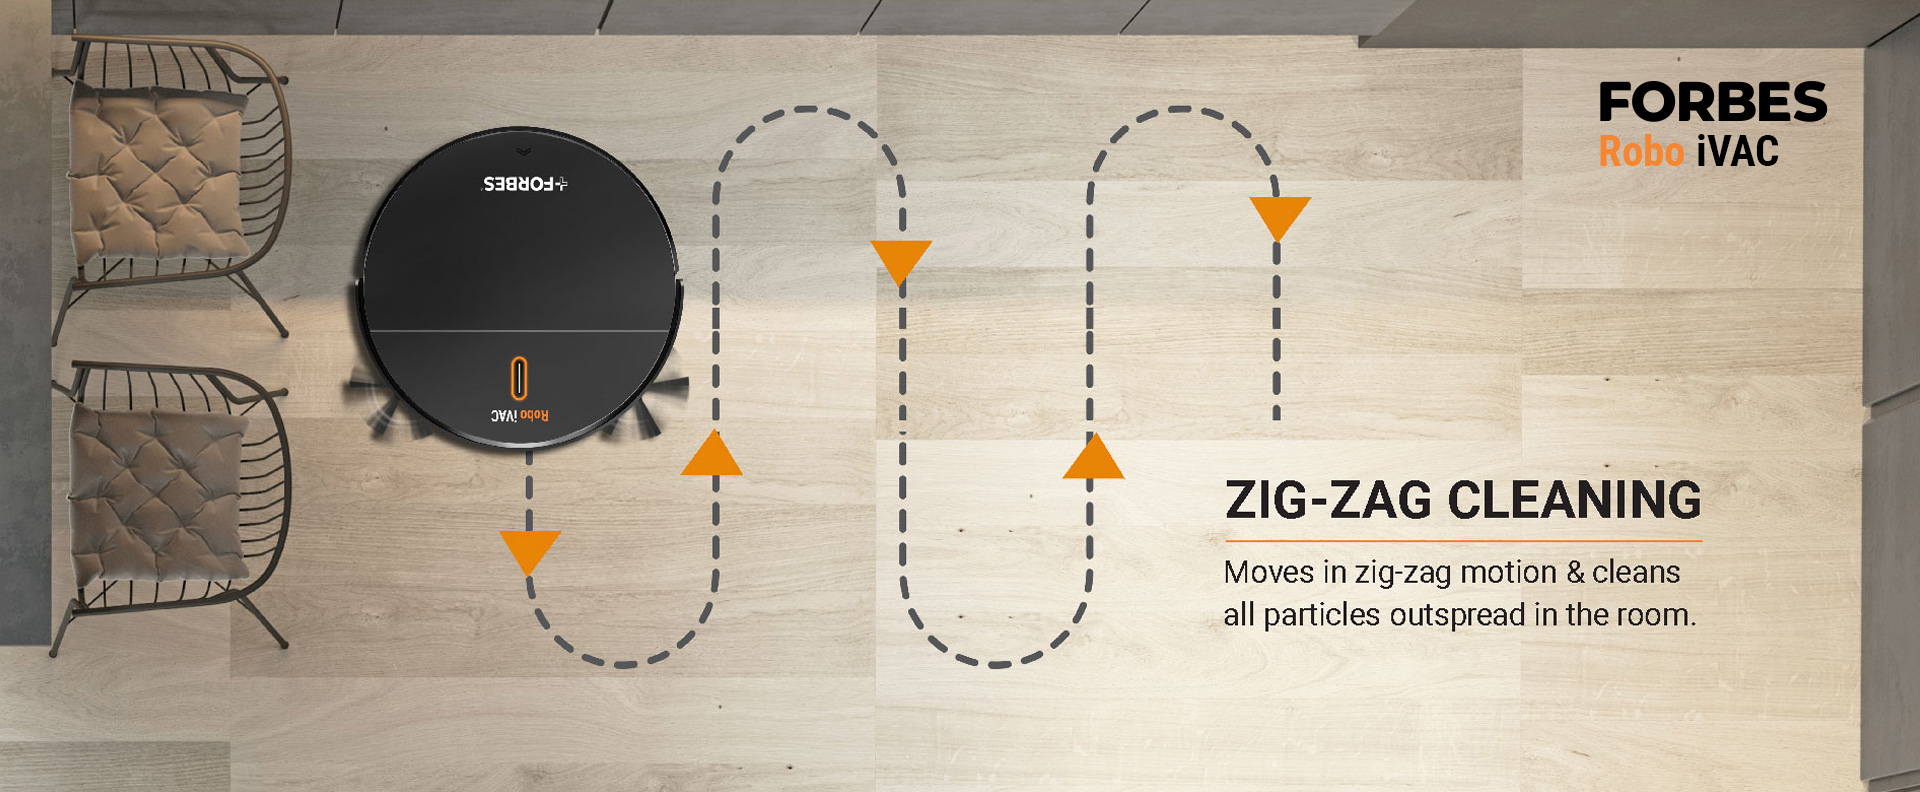 Moves in zig-zag motion & cleans all particles outspread in the room.